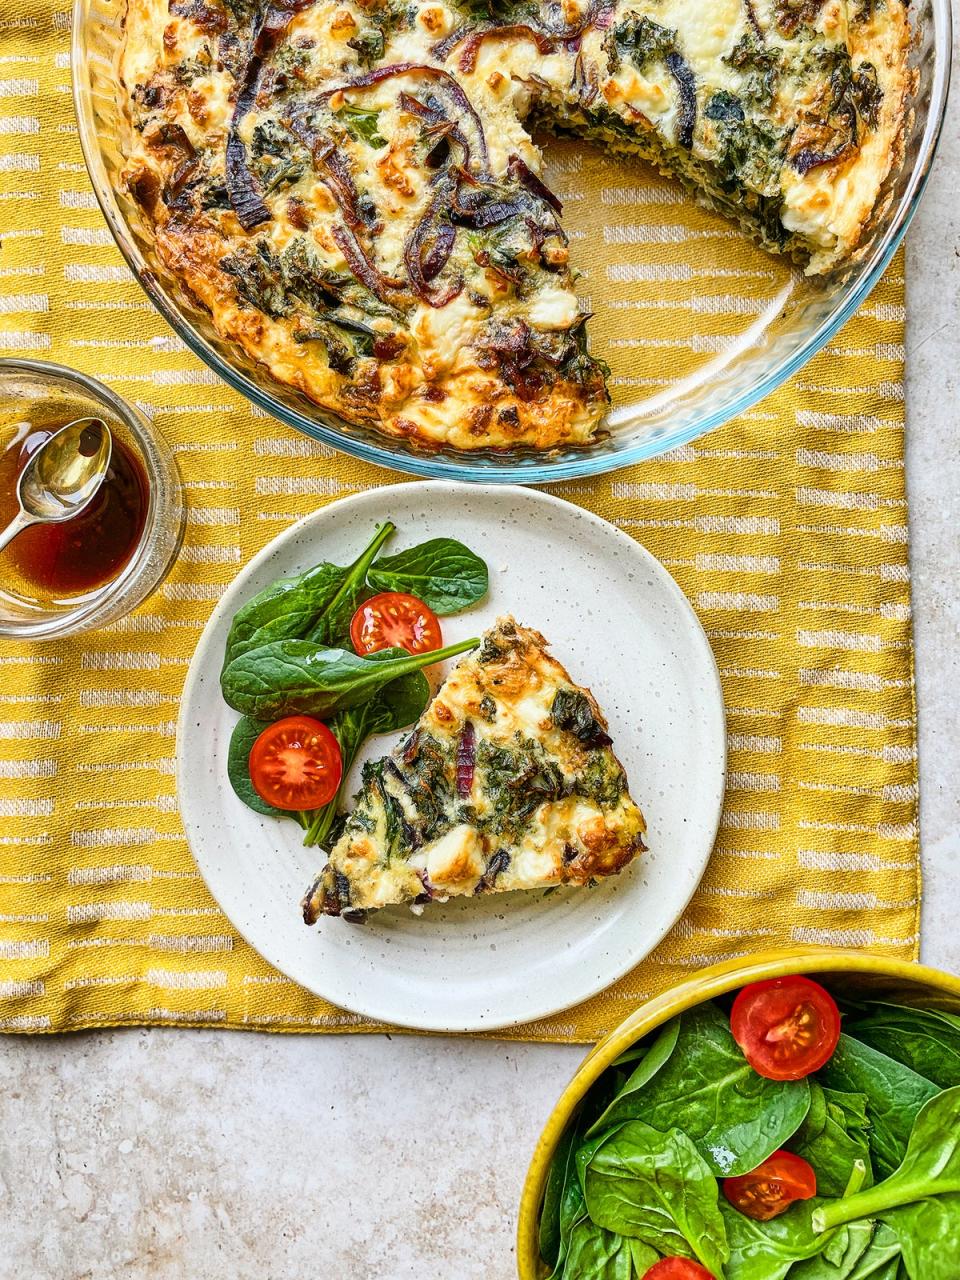 The kale crustless quiche can be made ahead and goes down a storm at picnics (Discover Great Veg)